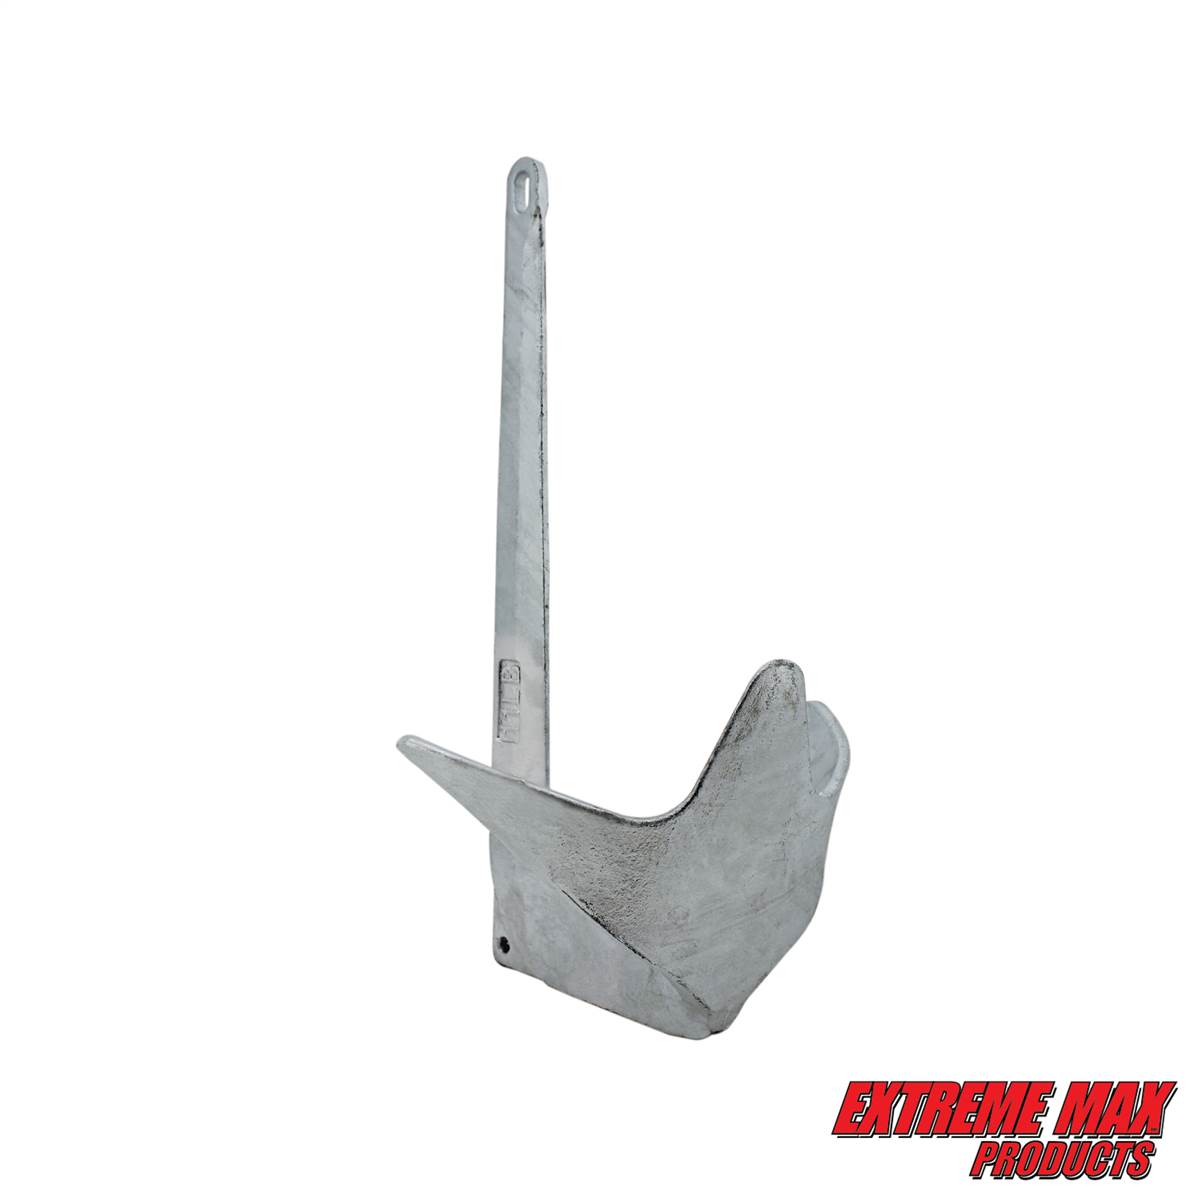 Extreme Max 3006.6536 BoatTector Claw Anchor 22 lbs. 